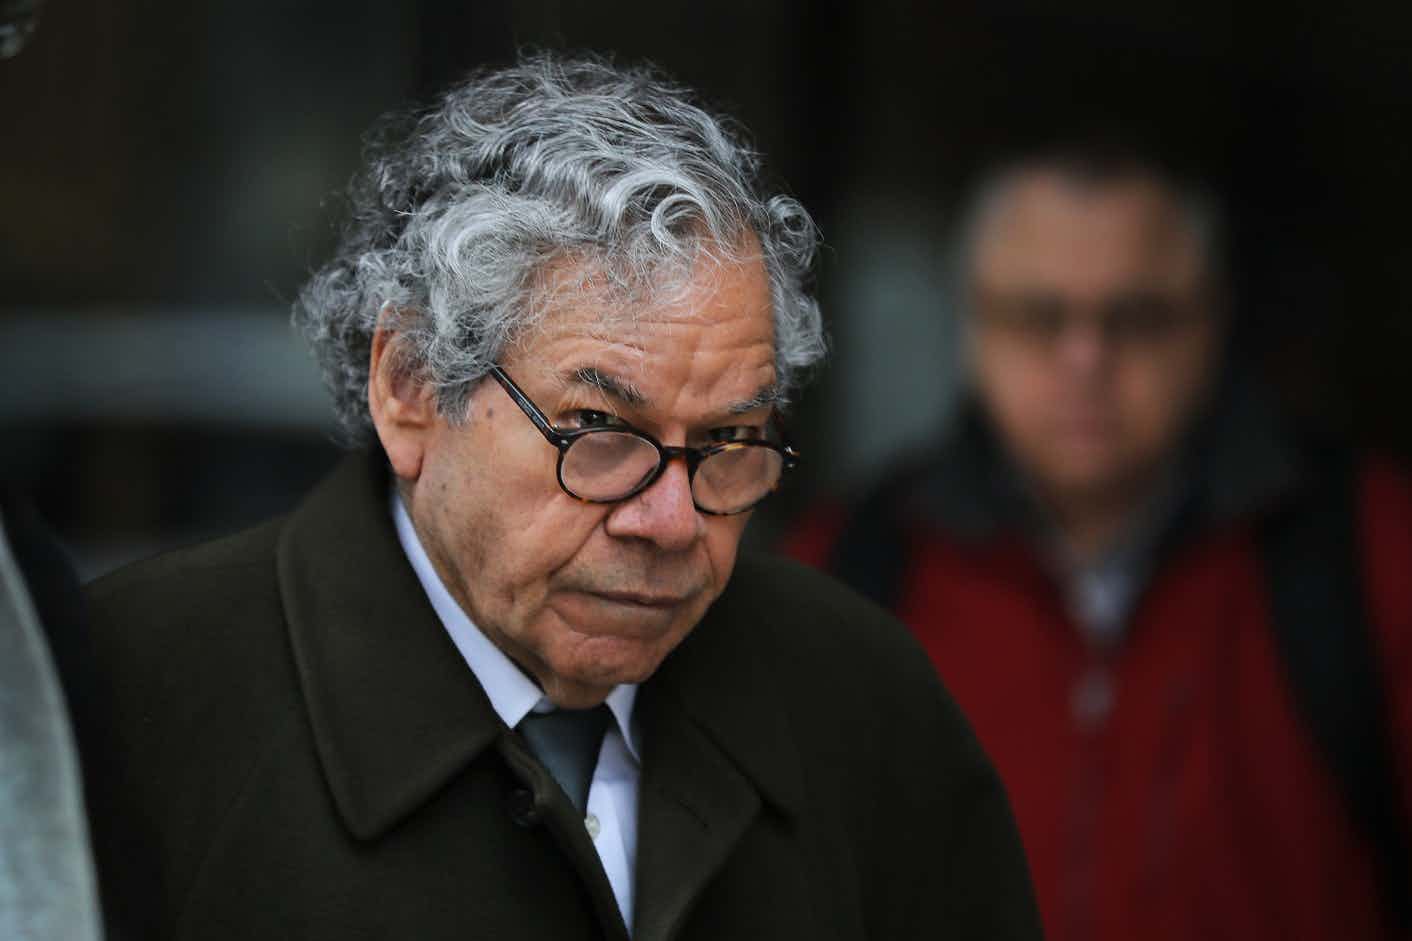 Insys Therapeutics founder John N. Kapoor leaves federal court in Boston on March 13, 2019 (Pat Greenhouse/The Boston Globe via Getty Images)
